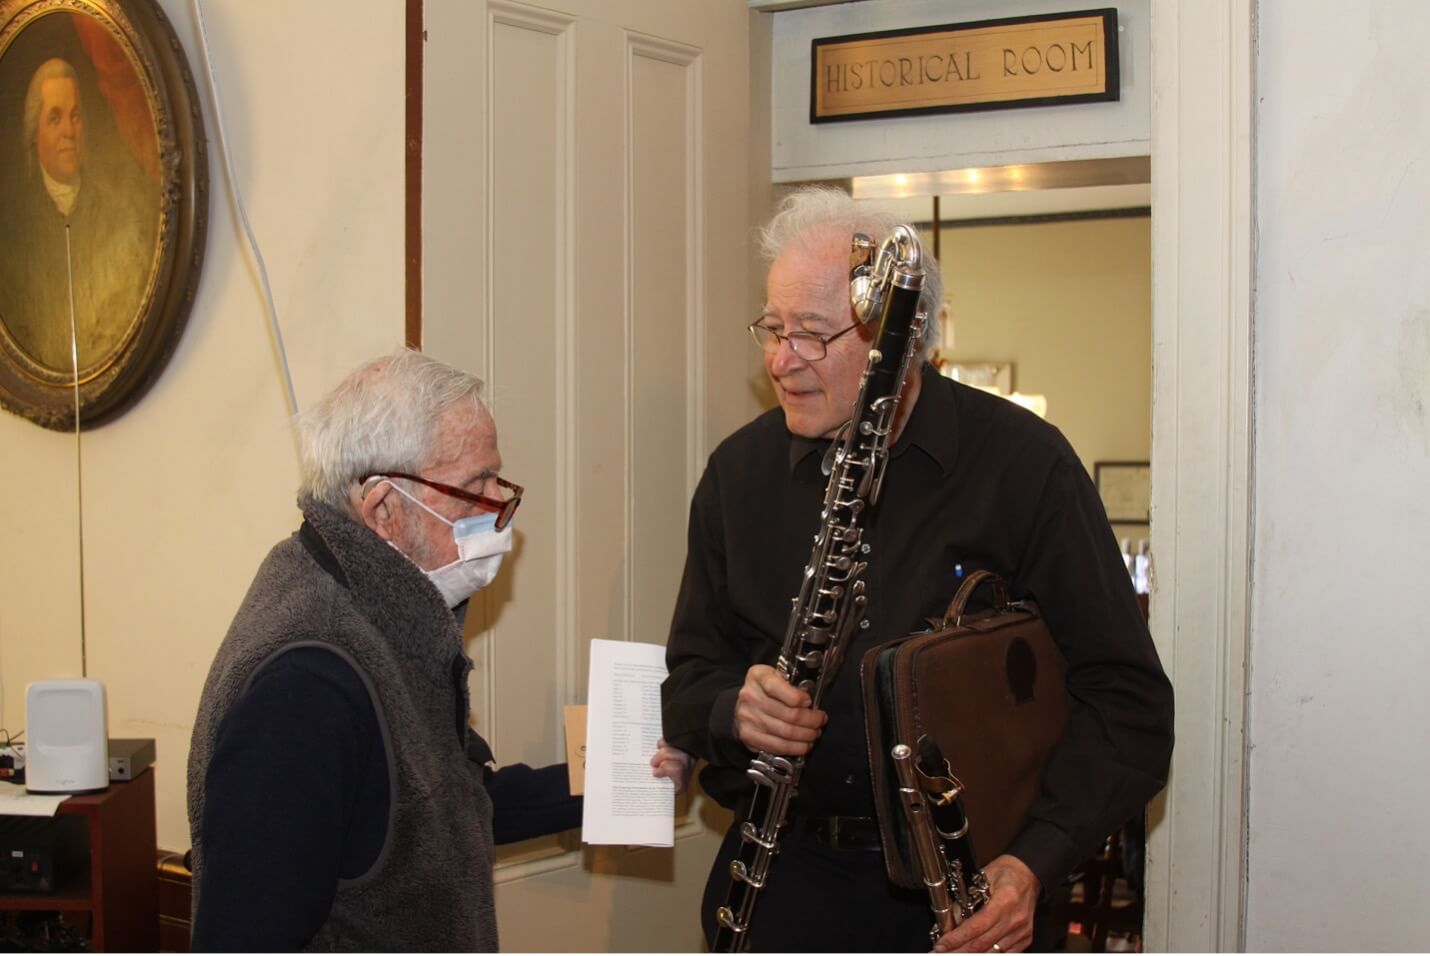 Donor Phil Cutter chatting with Stephen Bates, who played the clarinet and flute